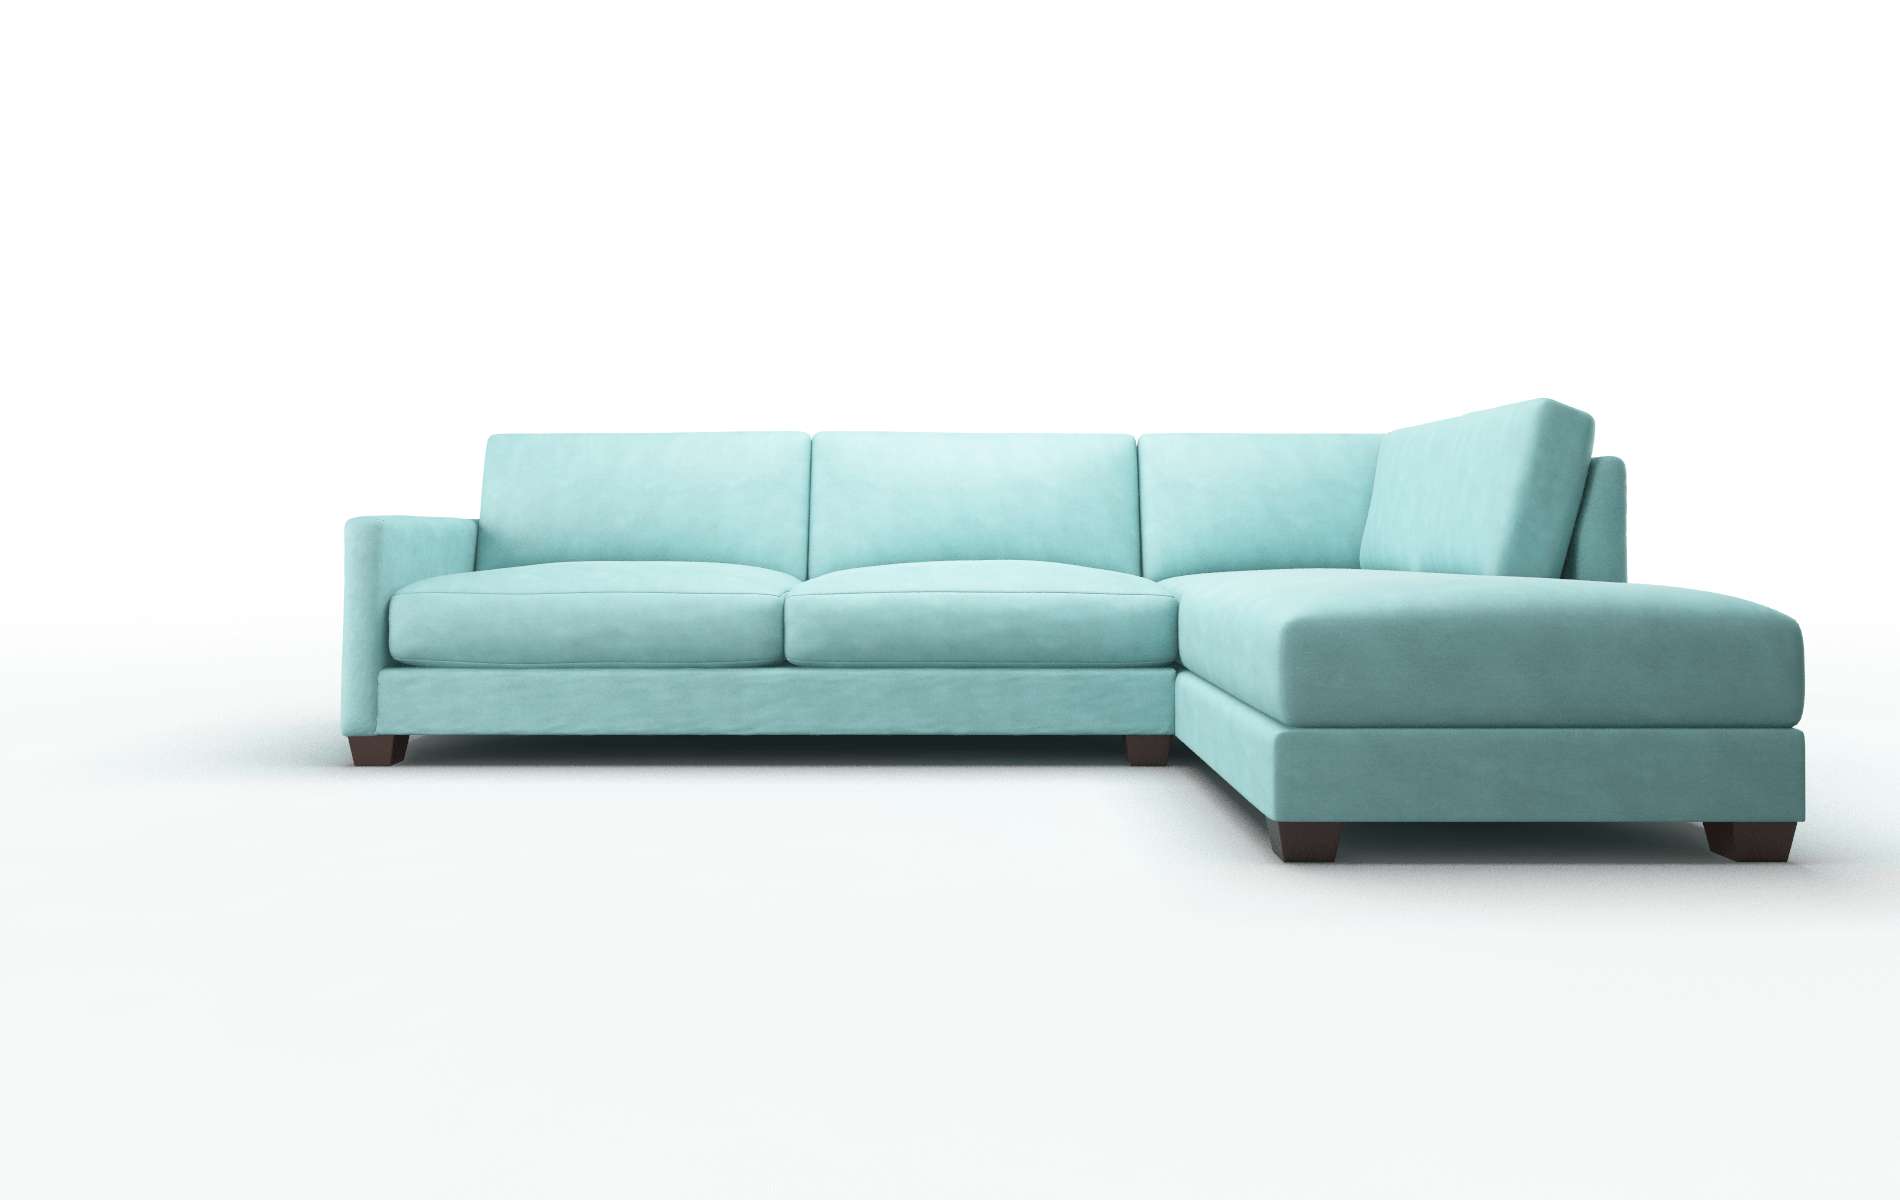 Dresden Curious Turquoise chair espresso legs